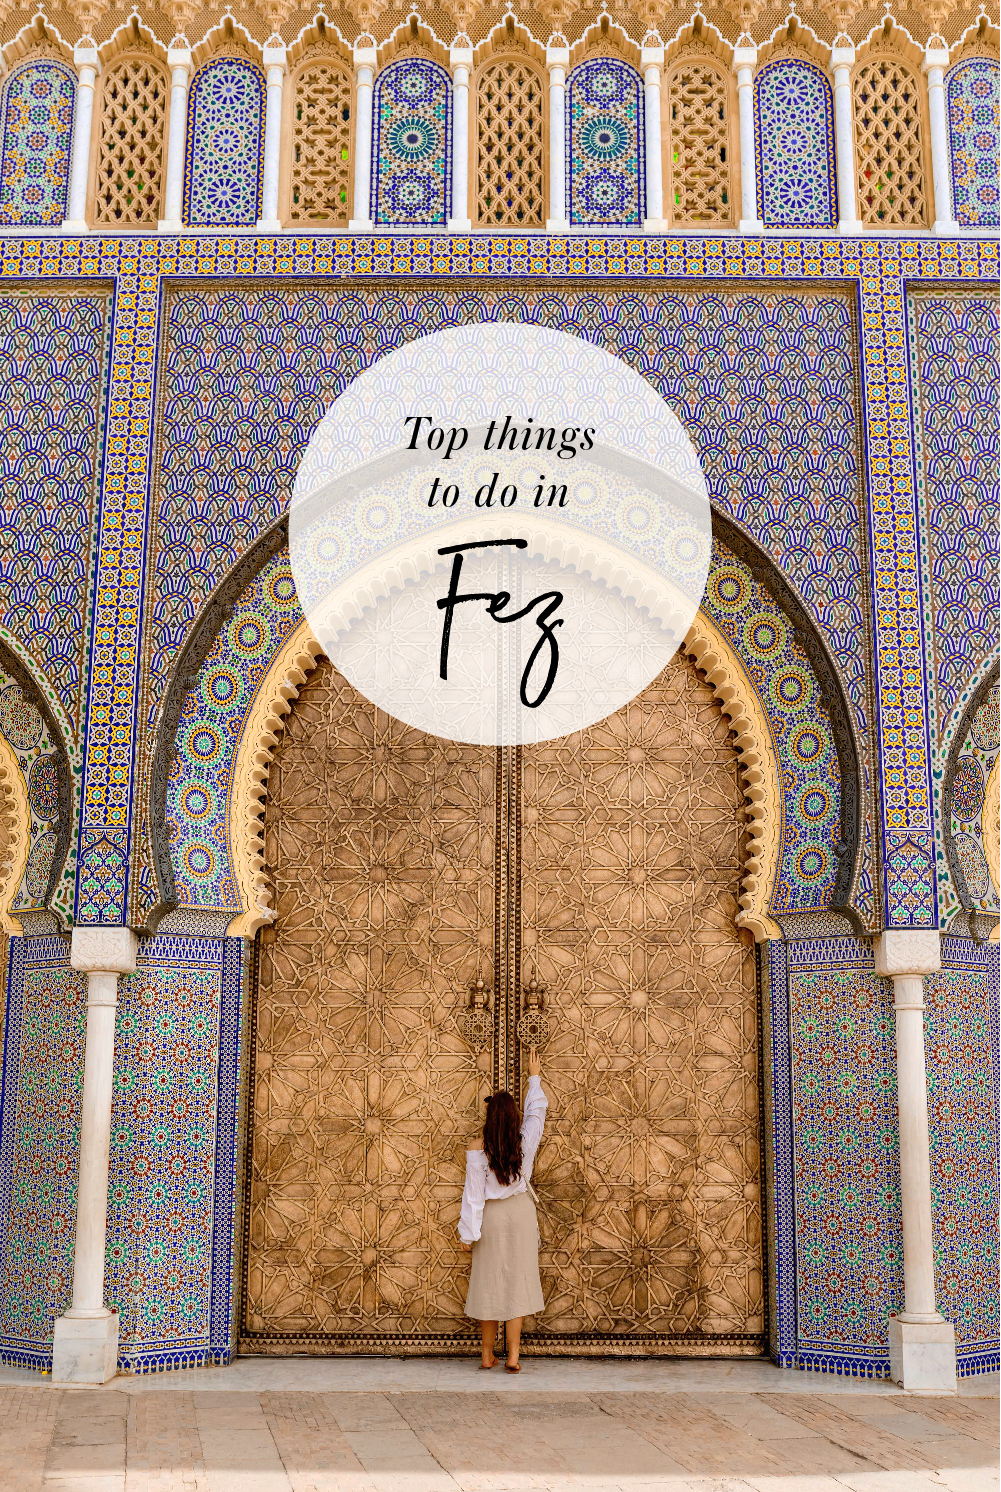 Top-things-to-do-in-Fez-Bucket-list-kelseyinlondon-Kelsey-Heinrichs--What-to-do-in-Fez--Where-to-go-in-Fez-top-places-in-Fez-2